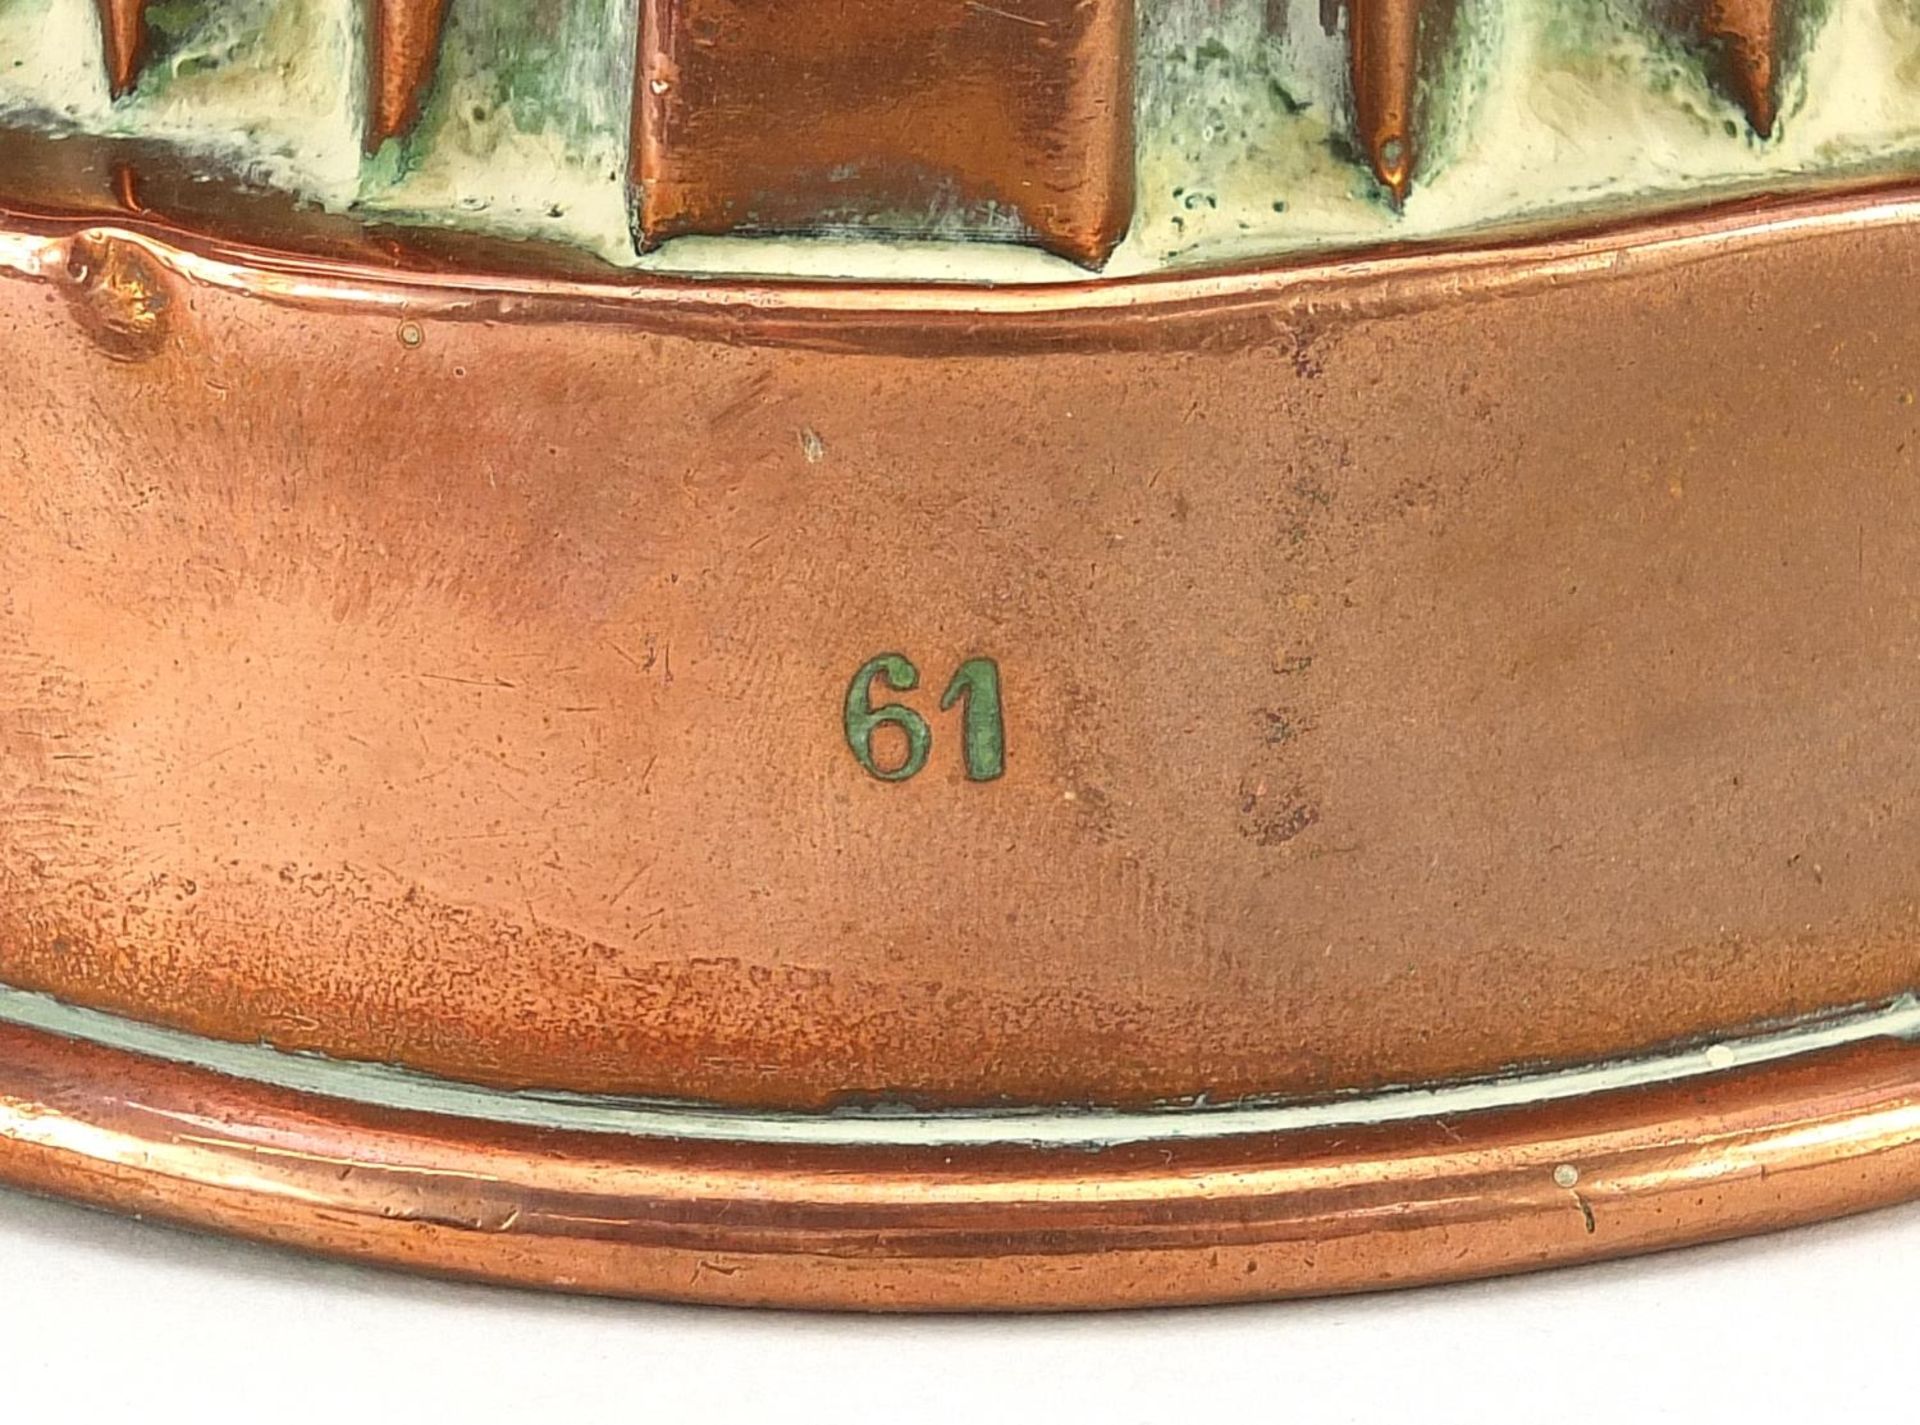 Victorian copper jelly mould numbered 61, 11cm high - Image 3 of 4